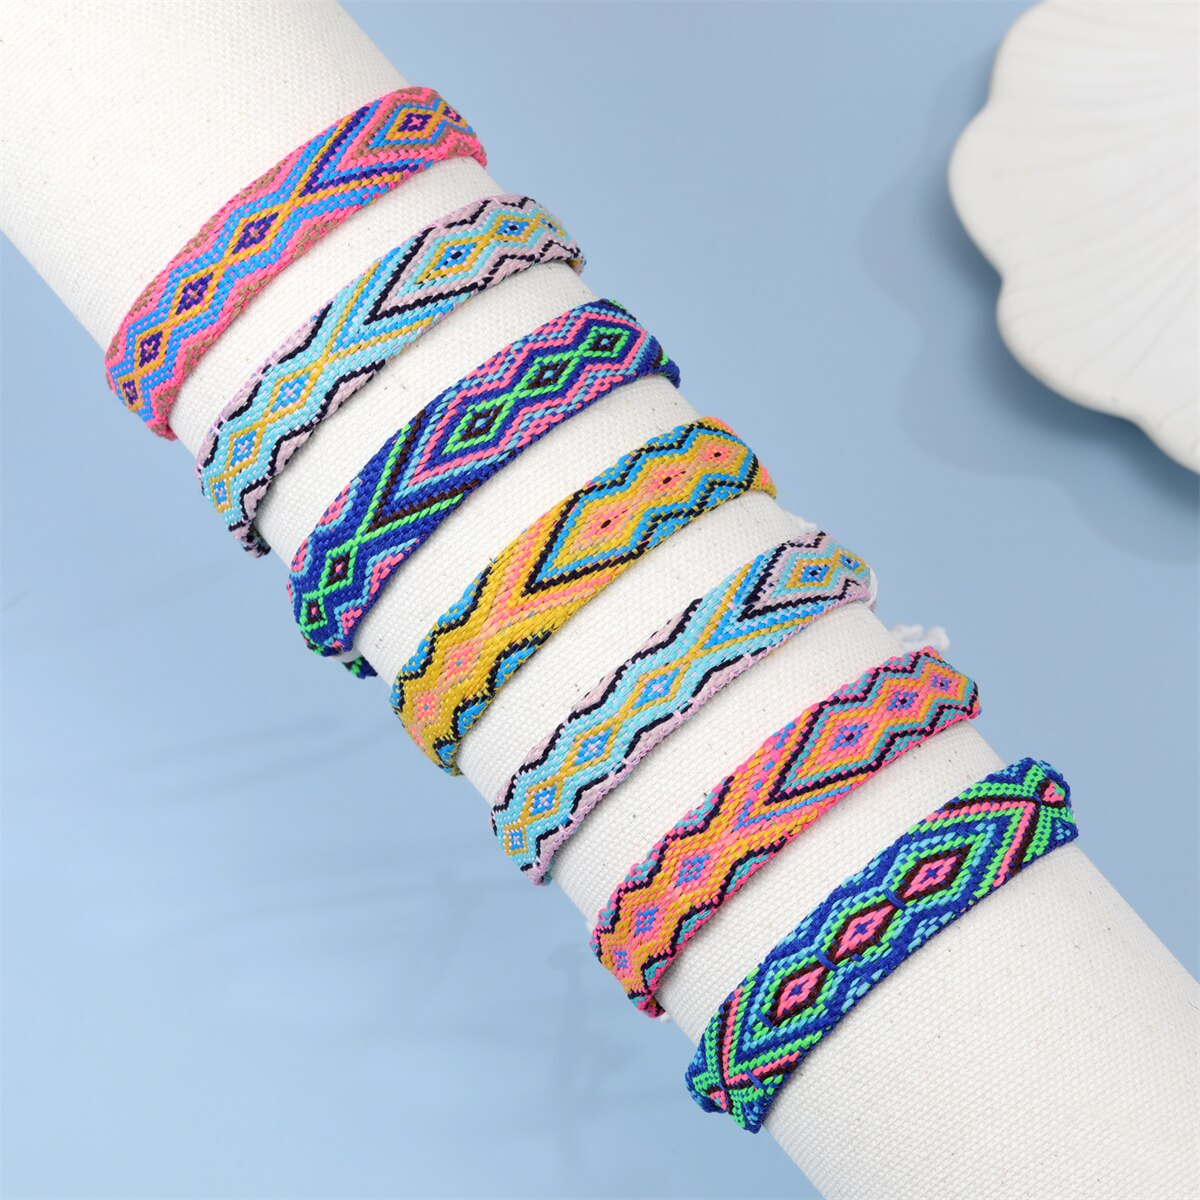 12pcs Wave Embroidery Charms Bracelets for Women Men Adjustable Size Summer Surf Anklet Wristband Cuff Jewelry Gift